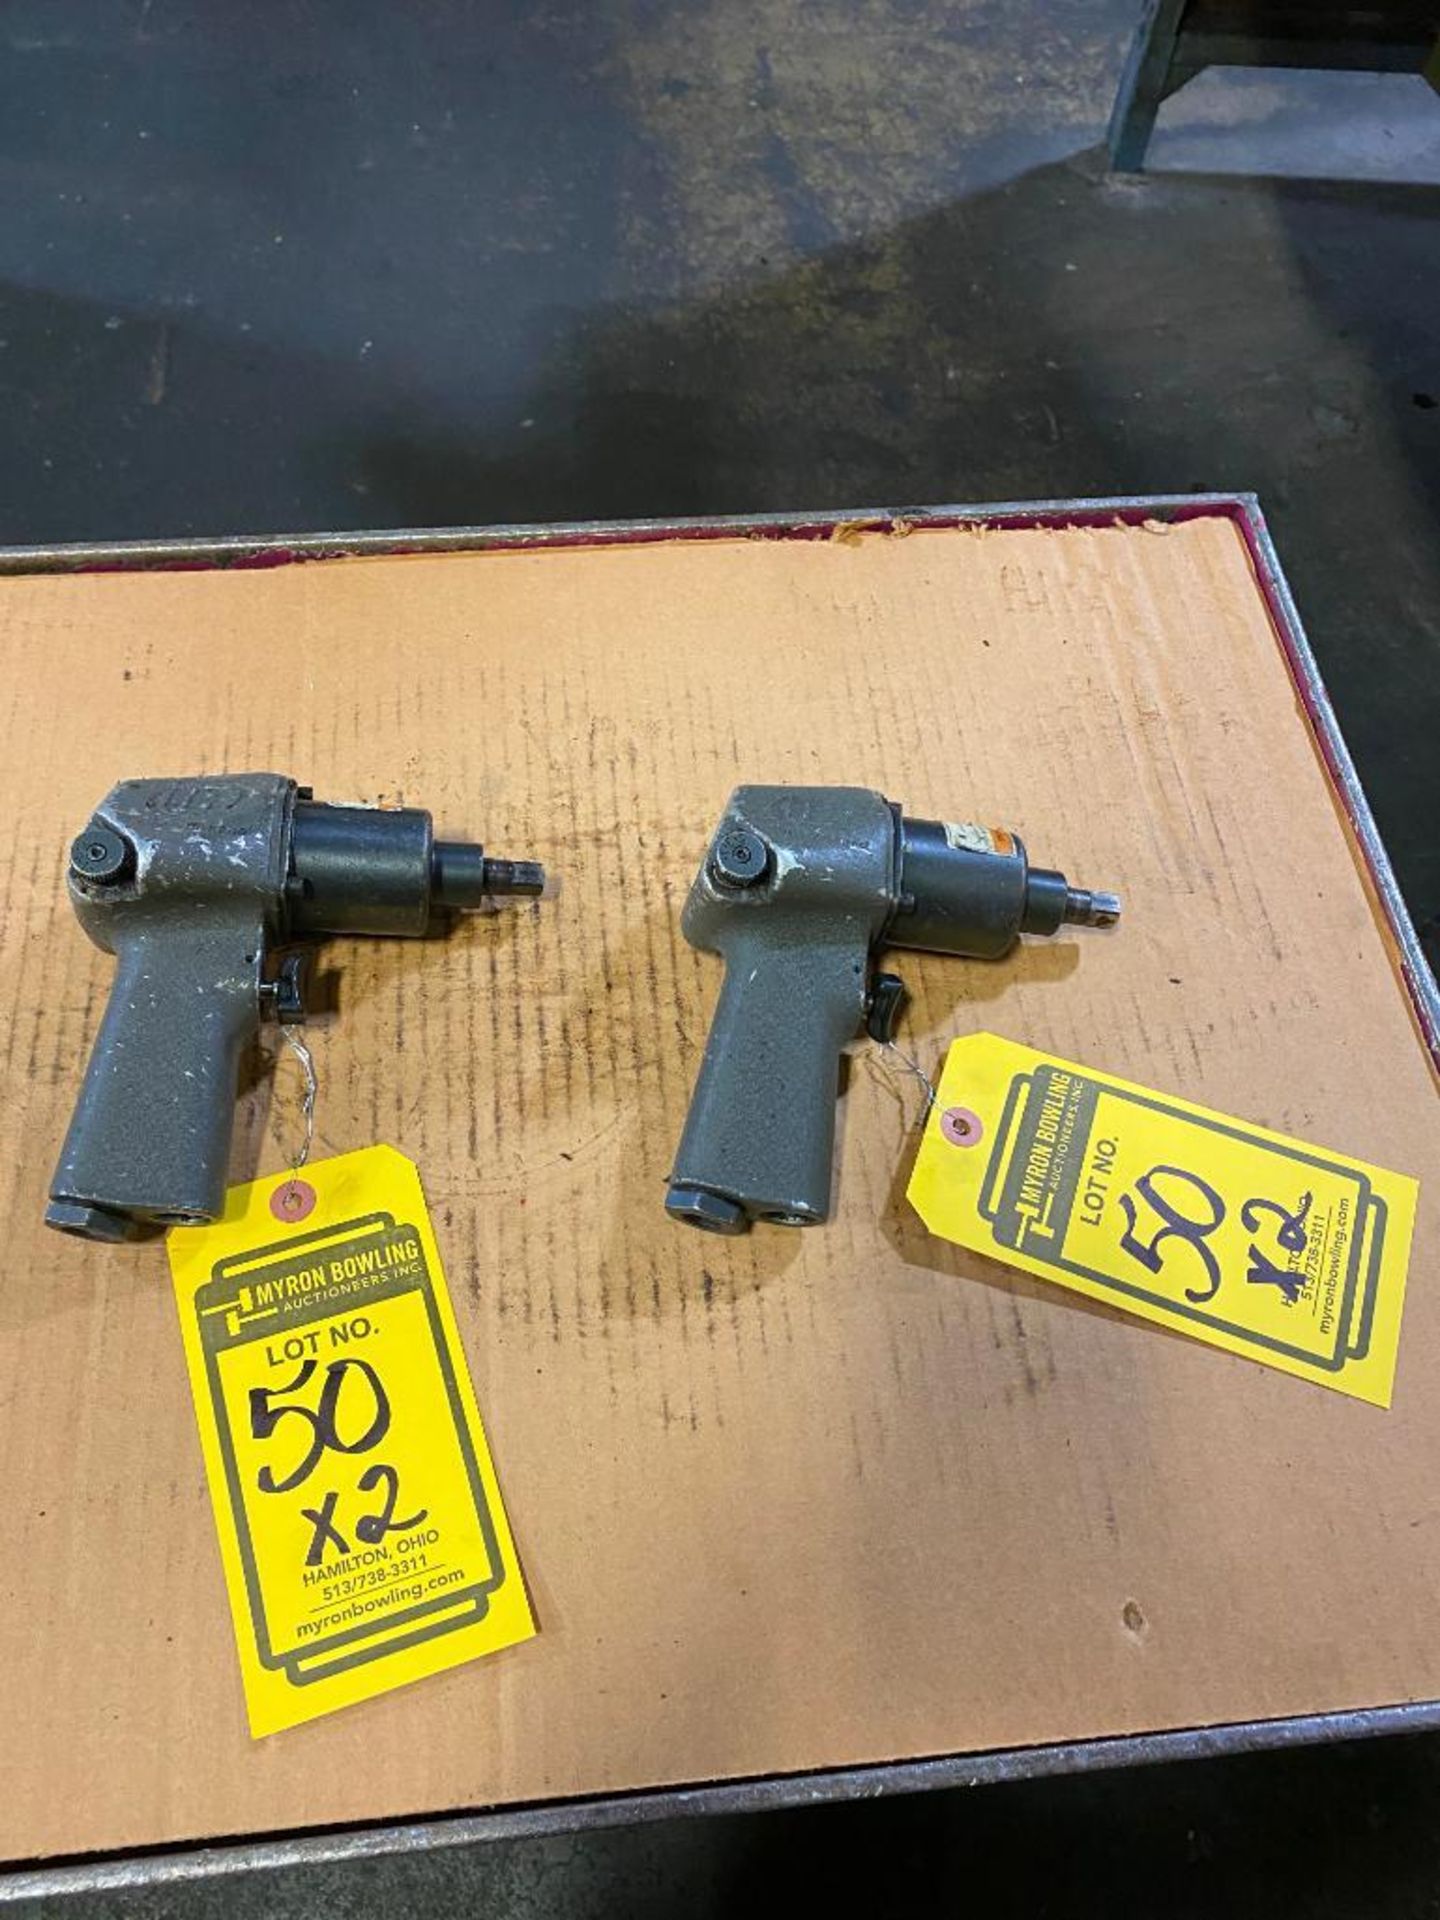 (2) Ingersoll Rand 3/8" Pneumatic Impact Wrenches